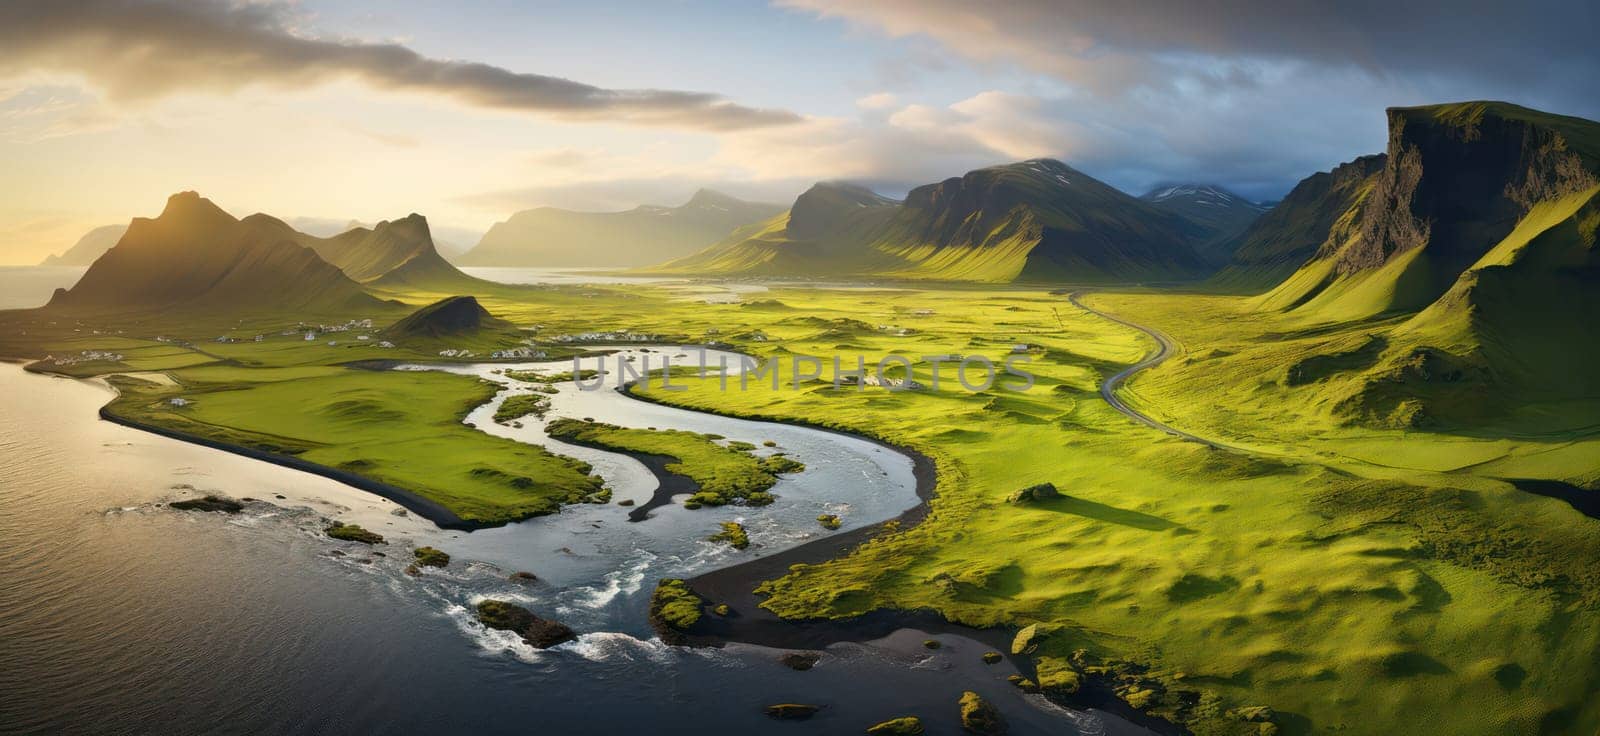 Awe-Inspiring Nordic Coastline: Majestic Mountains, Lush Green Hills, and Serene Ocean Waves under a Vibrant Sunset Sky